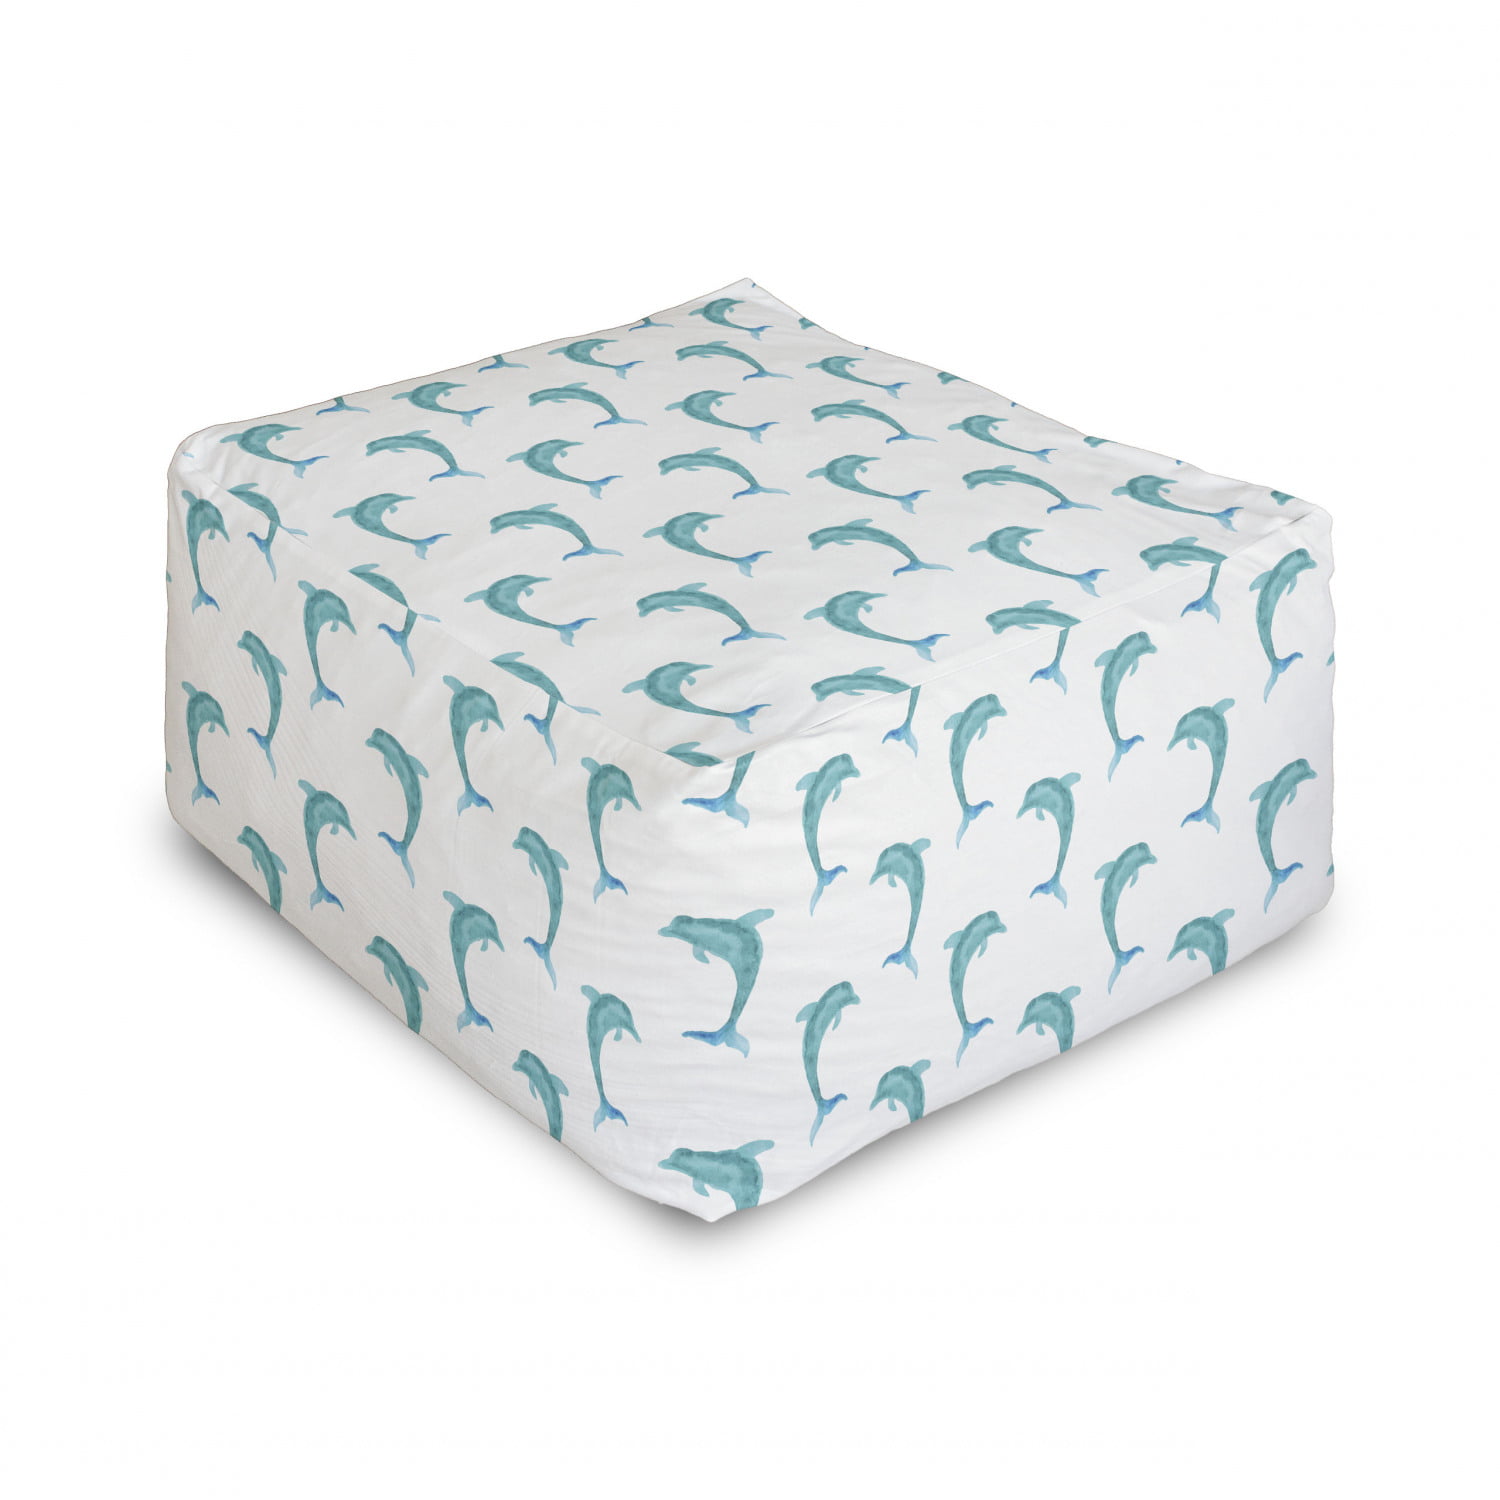 Under Desk Foot Stool for Living Room Office Ottoman with Cover Rhythmic Motifs of Sailboats Nautical Theme on a Plain Backdrop Marine Lifestyle Ambesonne Boat Rectangle Pouf 25 Multicolor 